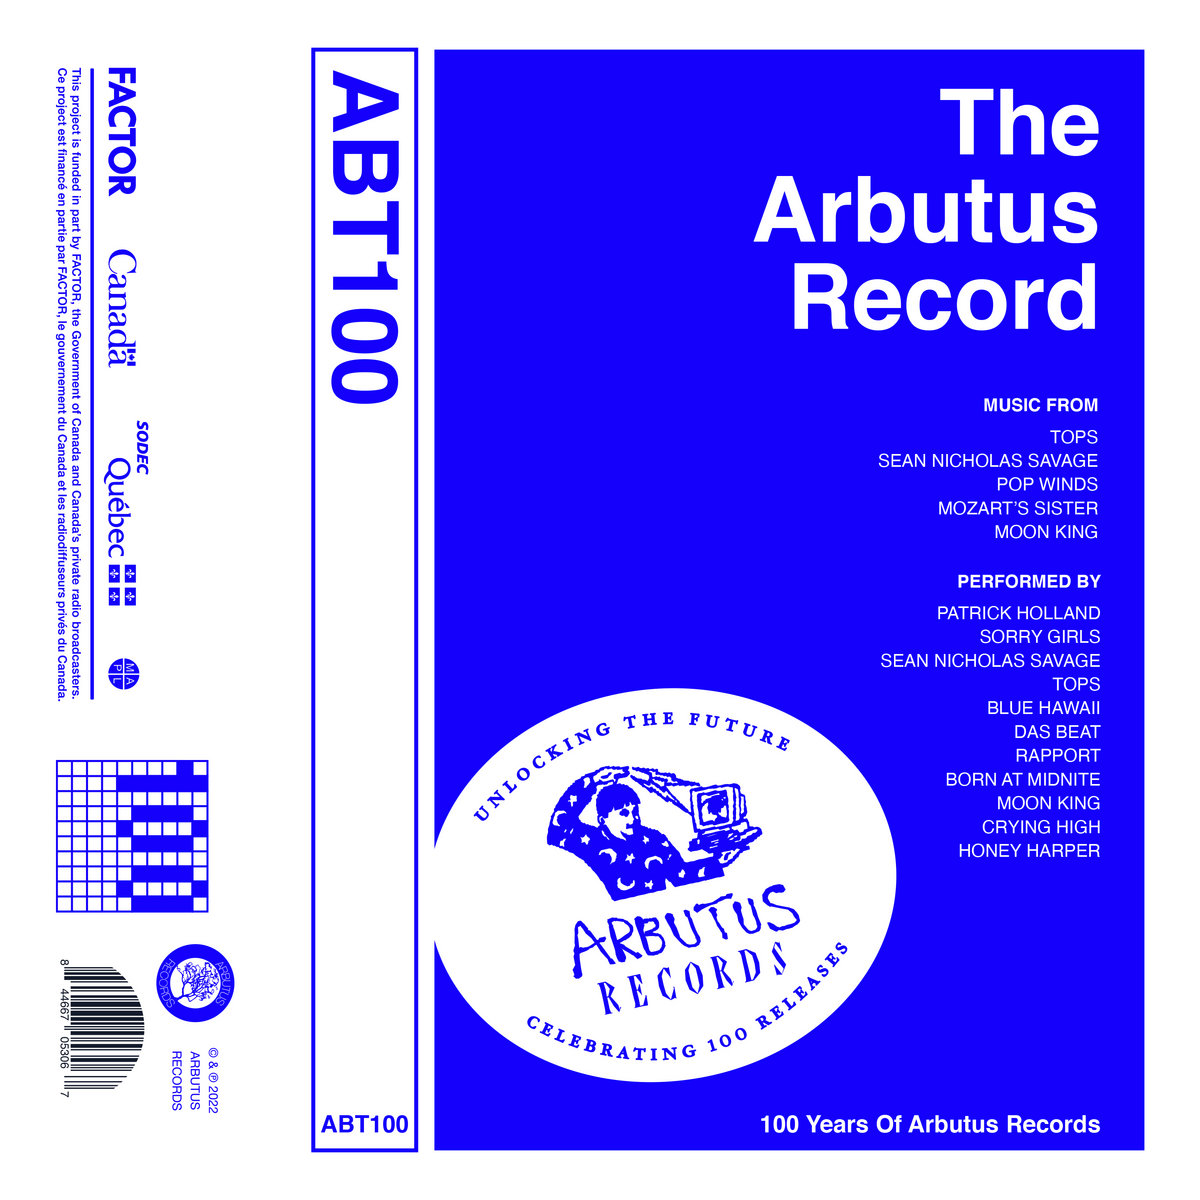 Hear TOPS And Sean Nicholas Savage Cover Each Other On New Arbutus Comp